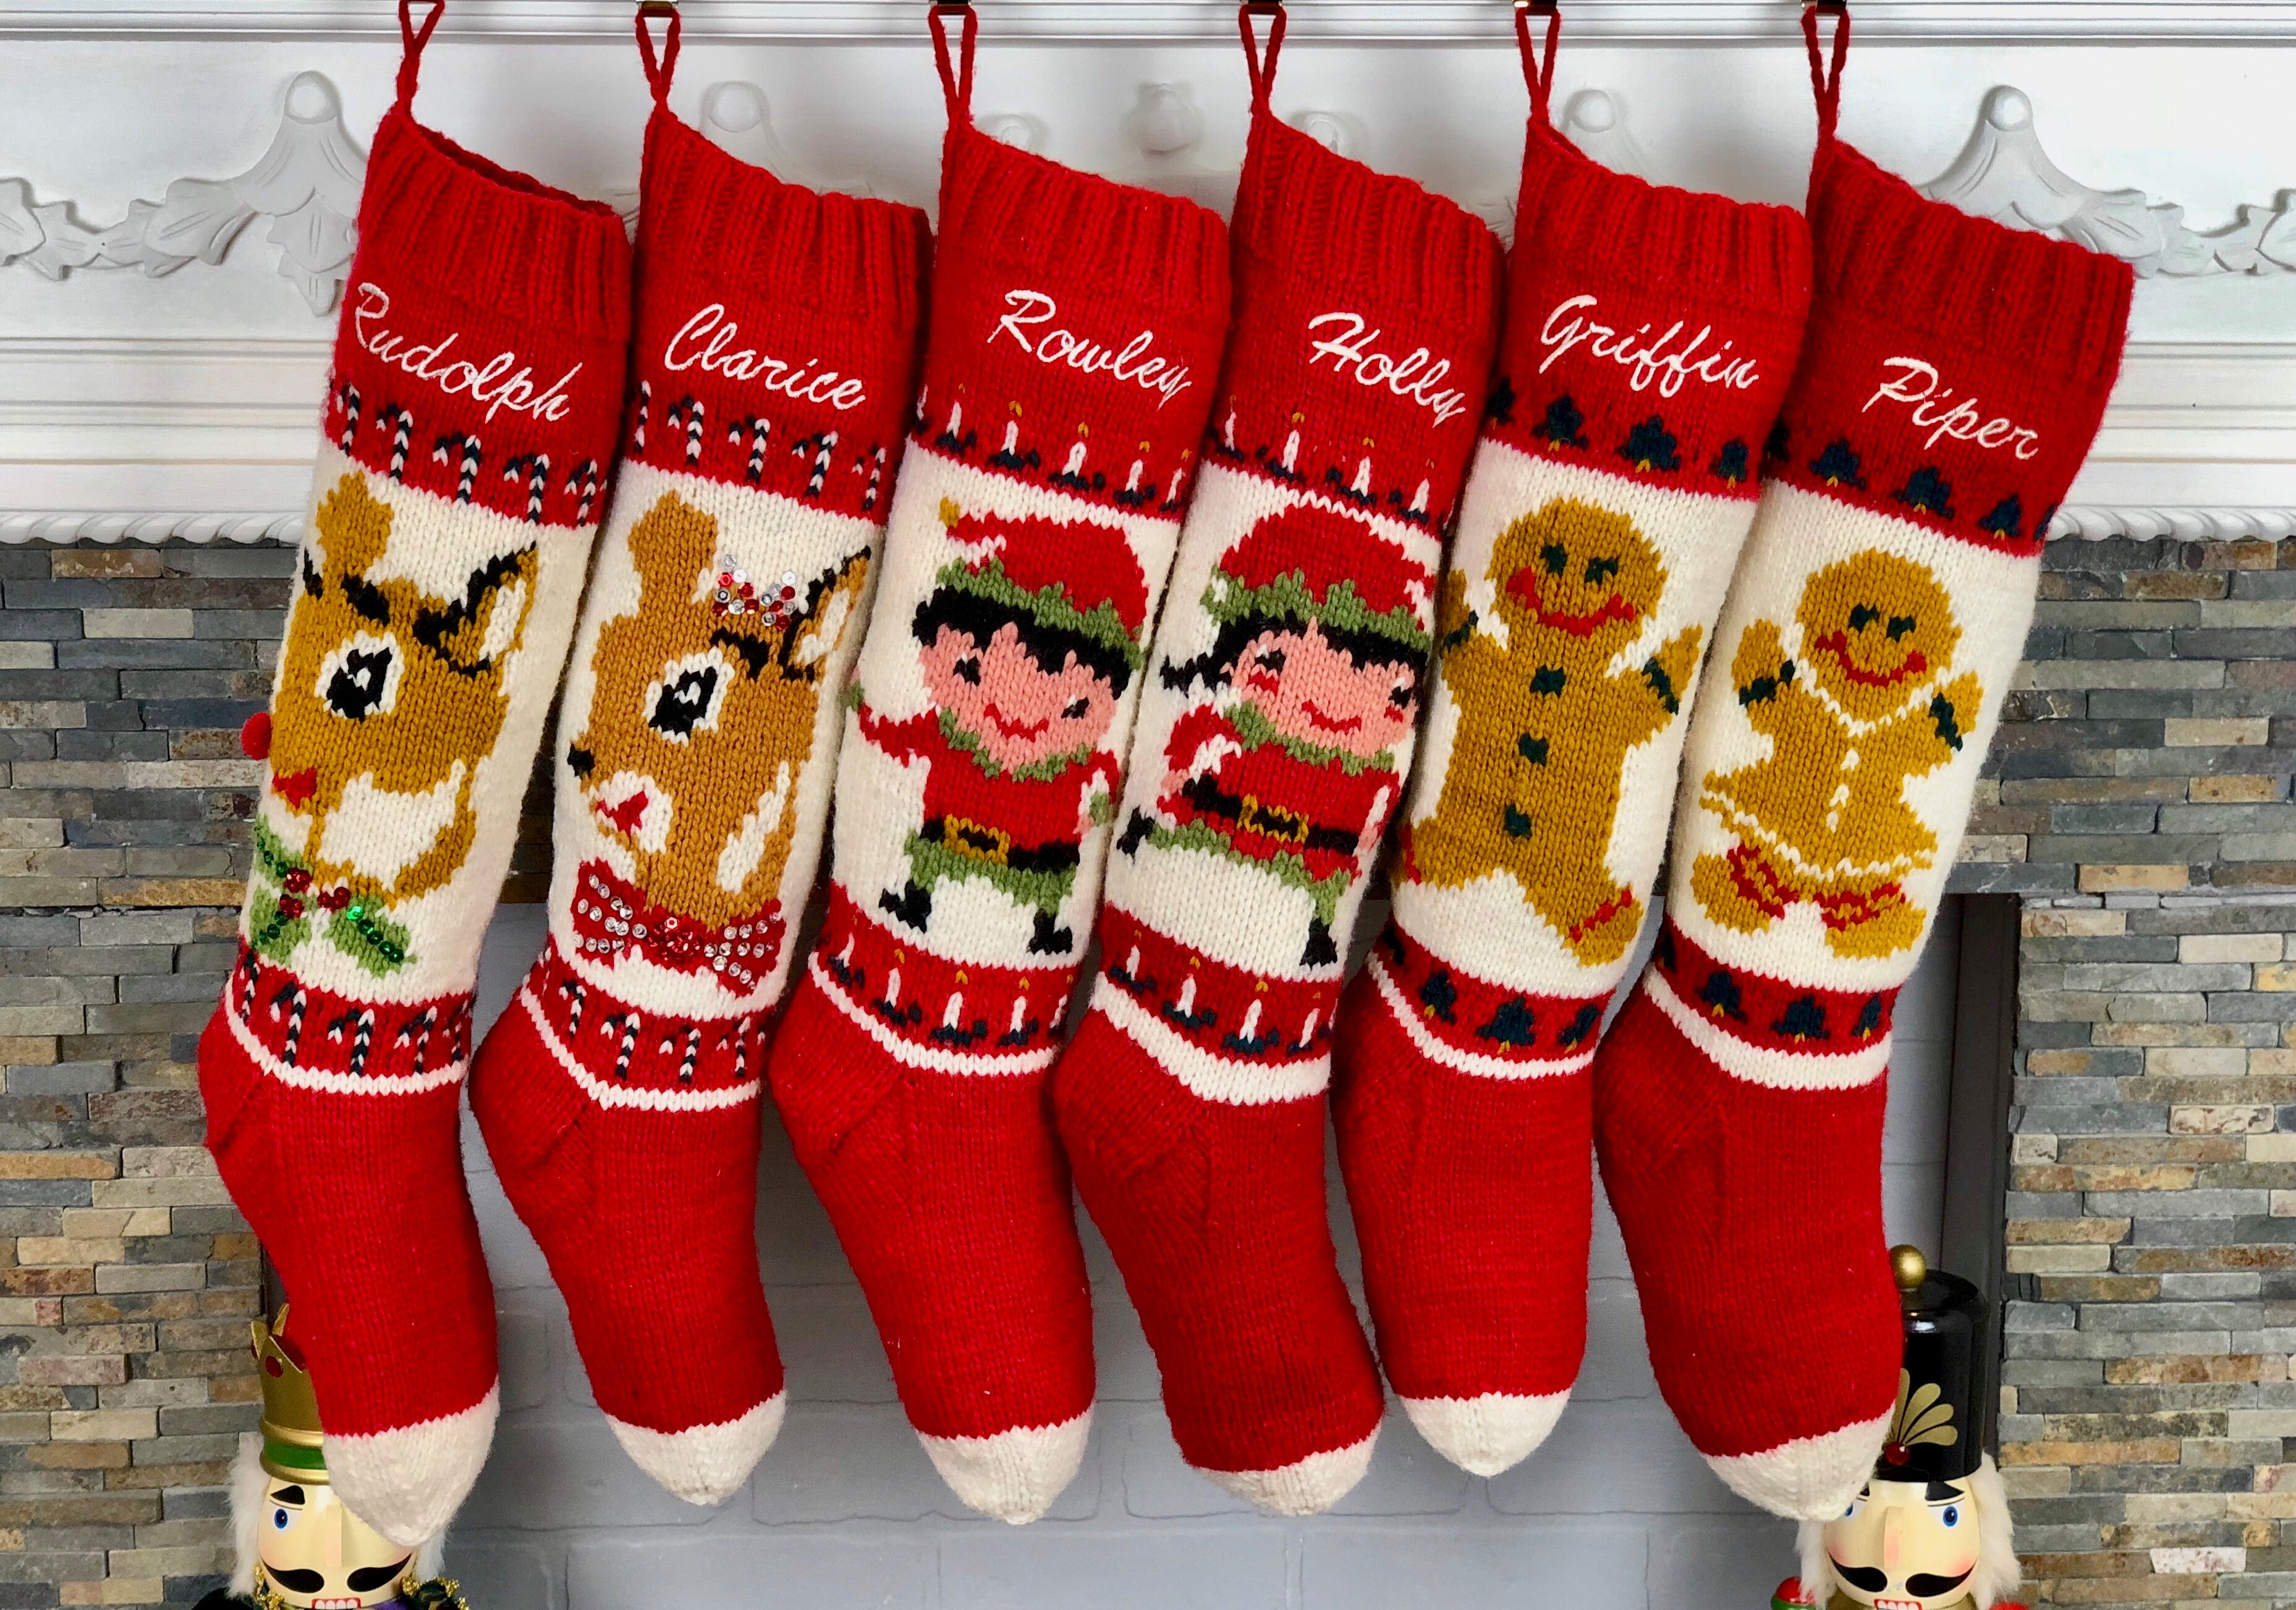 Christmas stockings are the perfect personalized wedding gift